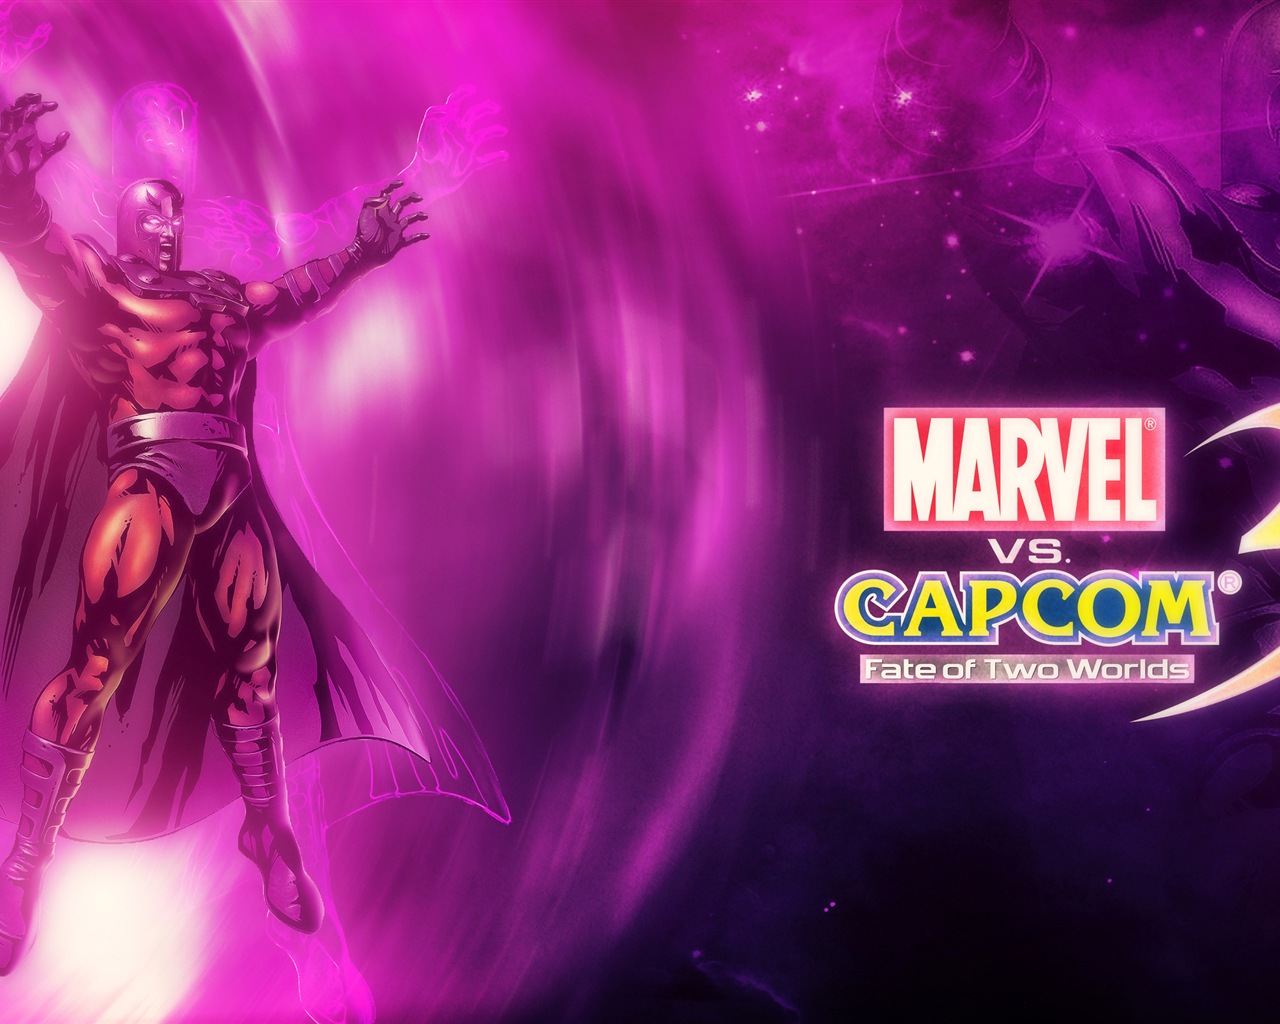 Marvel VS. Capcom 3: Fate of Two Worlds HD game wallpapers #7 - 1280x1024